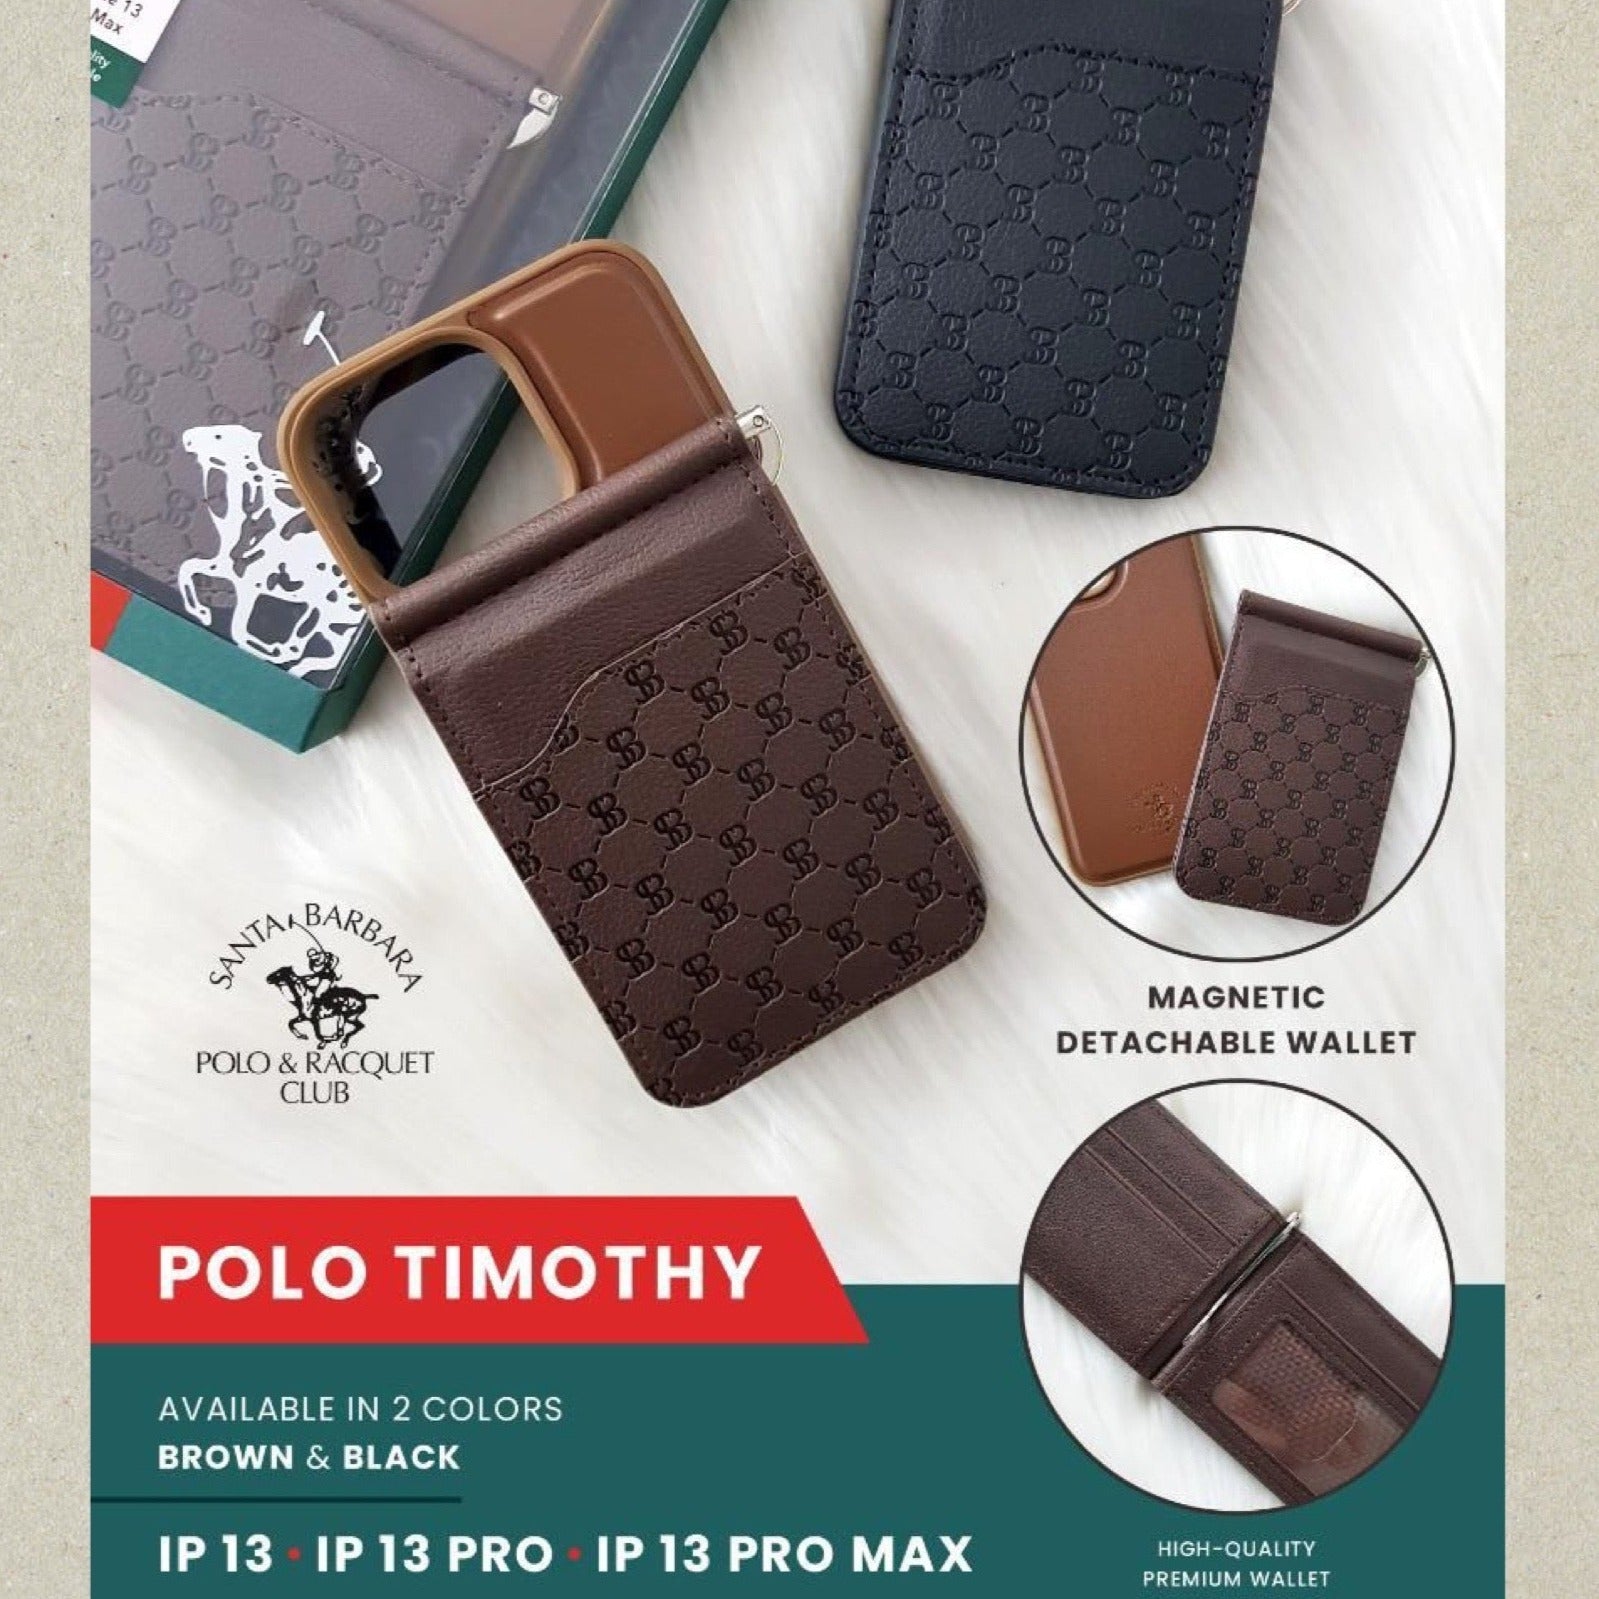 POLO TIMOTHY 2022 EDITION LEATHER CASE WITH MONEY CLIPPER